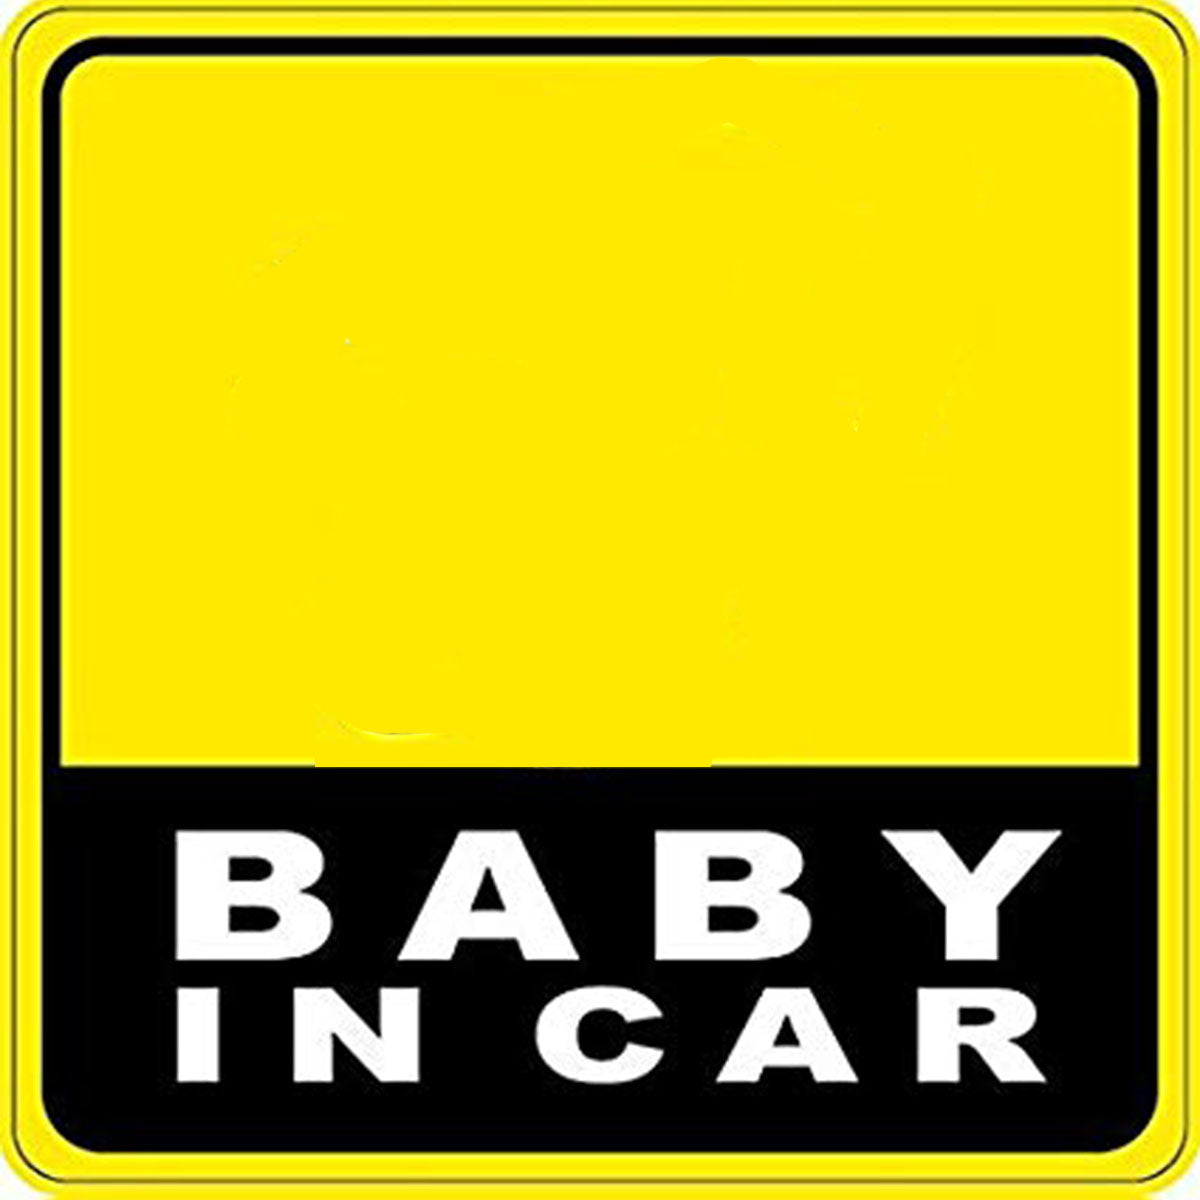 PERSONALISED STICKER (BABY IN CAR Safety) STICKERS VINYL CAR DECALS ACCESSORIES